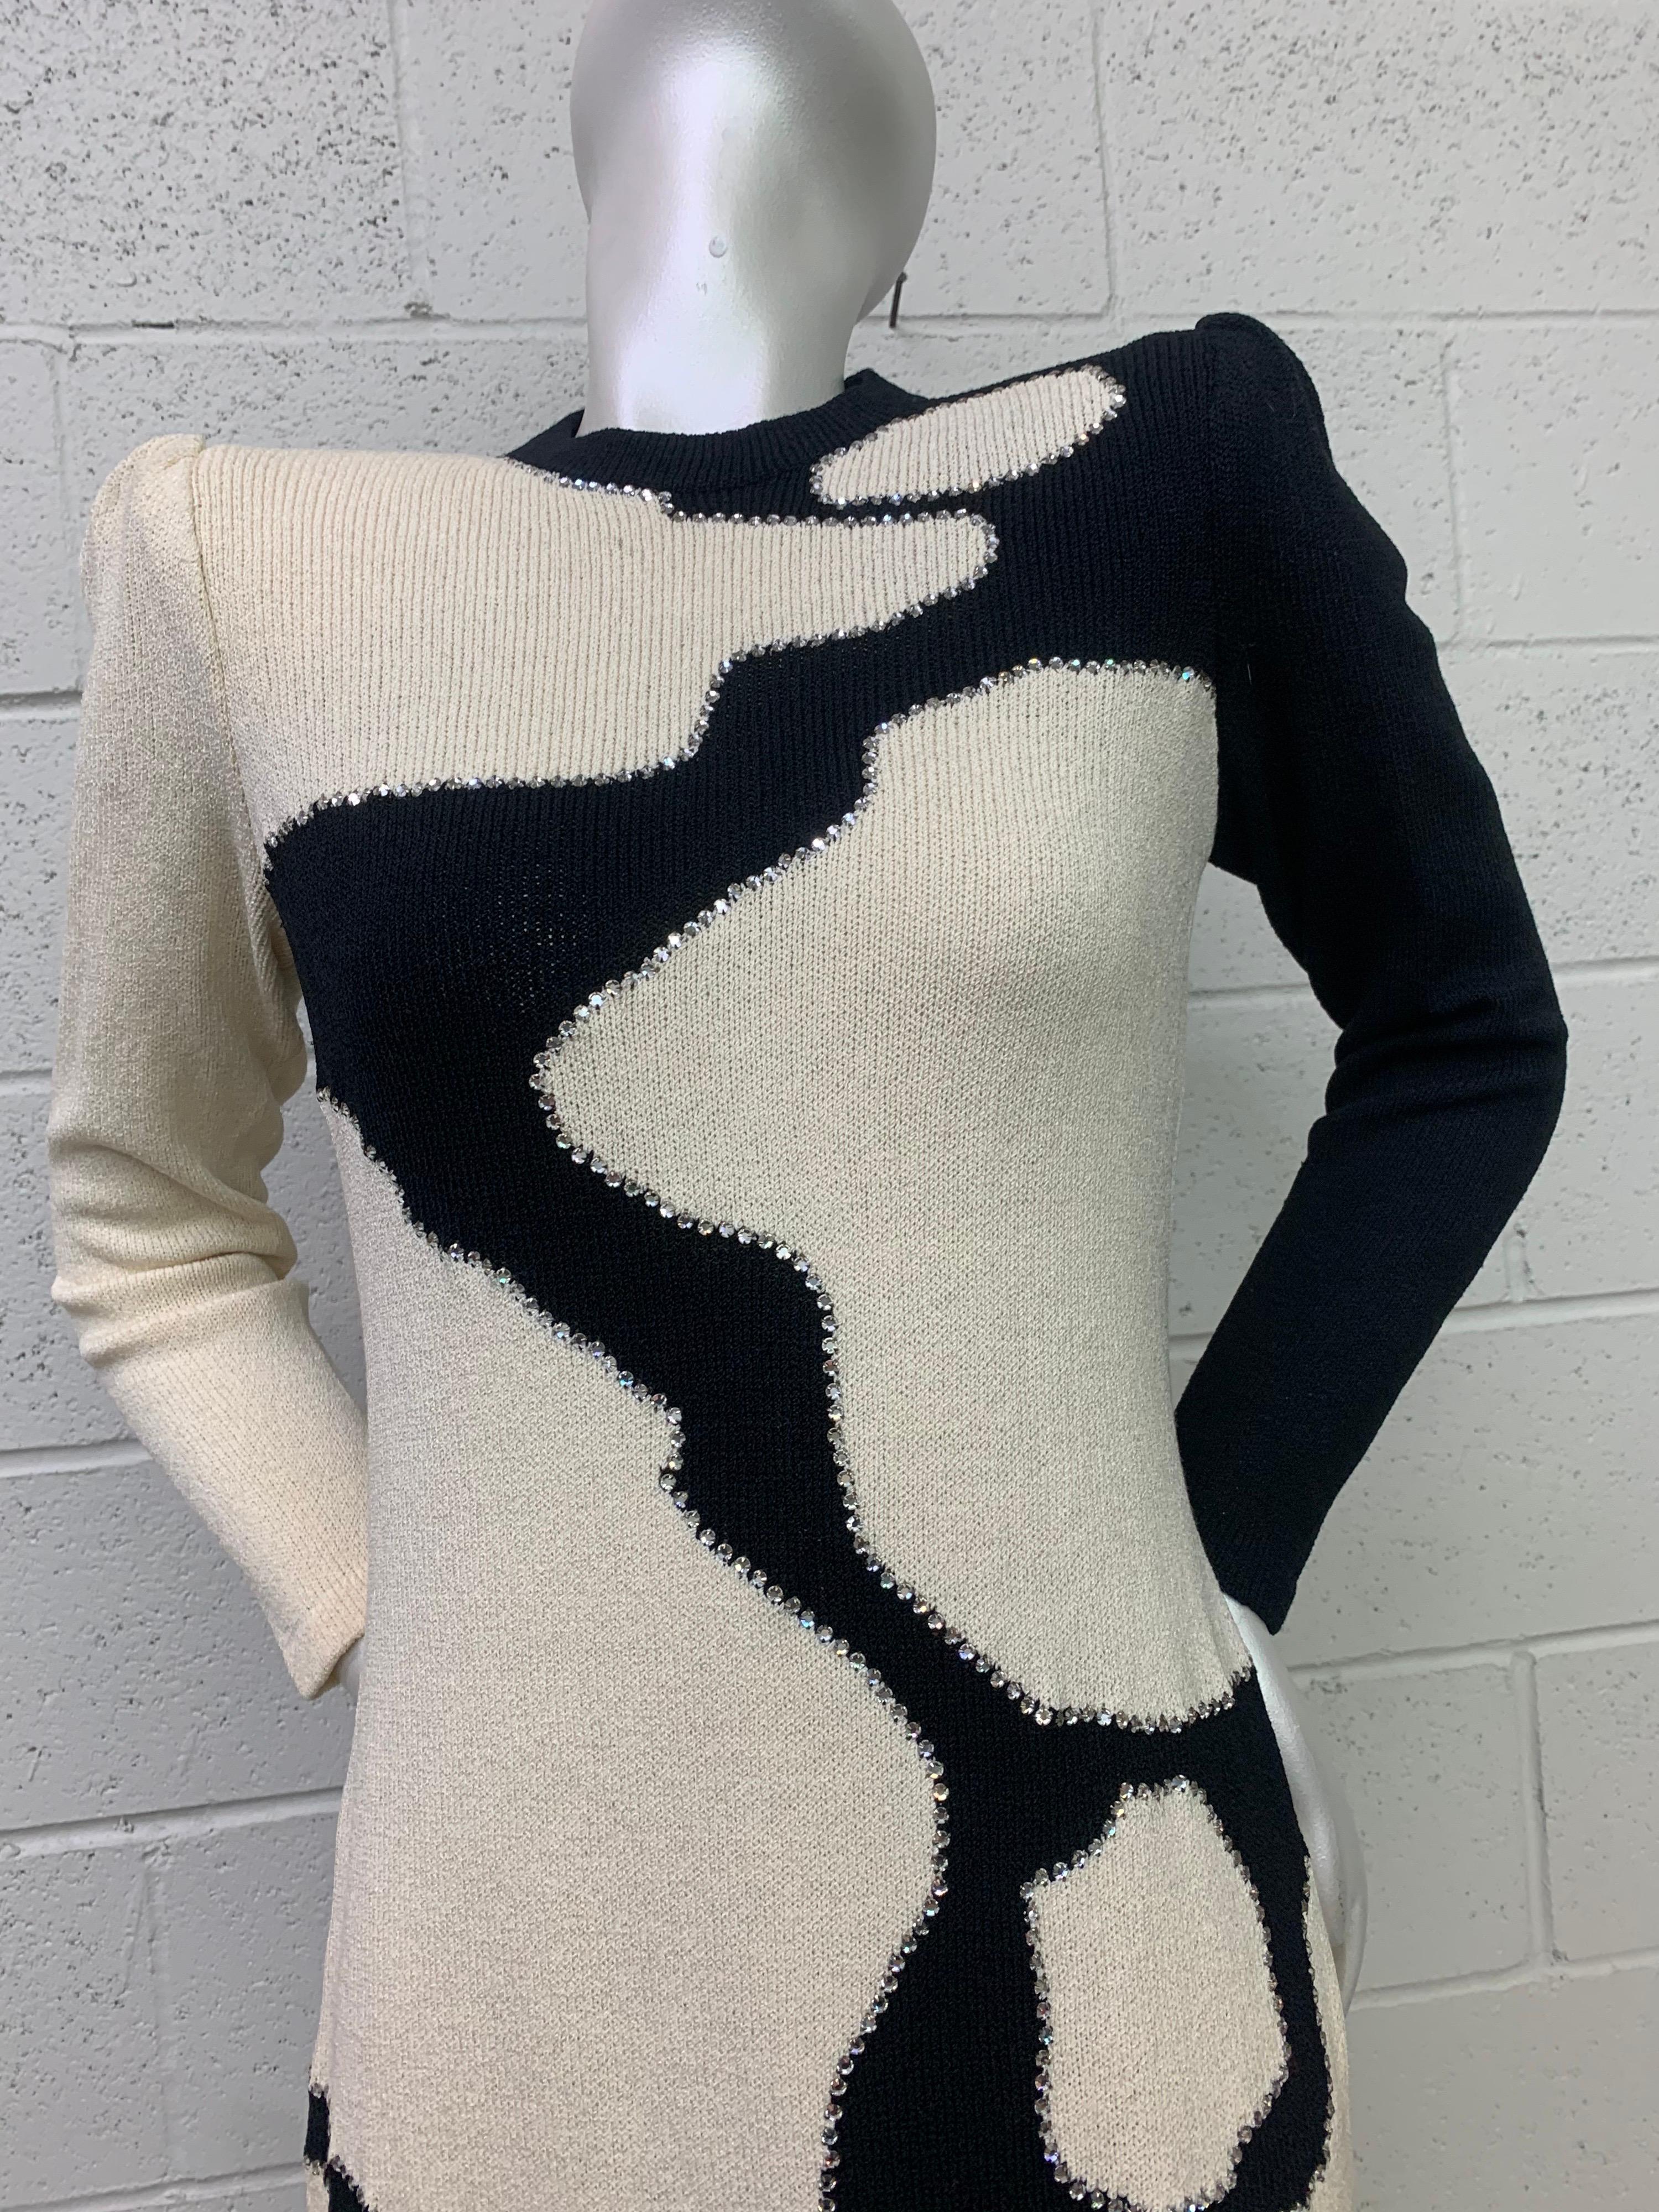 1970s Adolfo Black and White Graphic Maxi Knit Dress w/ Rhinestone Accents In Excellent Condition For Sale In Gresham, OR